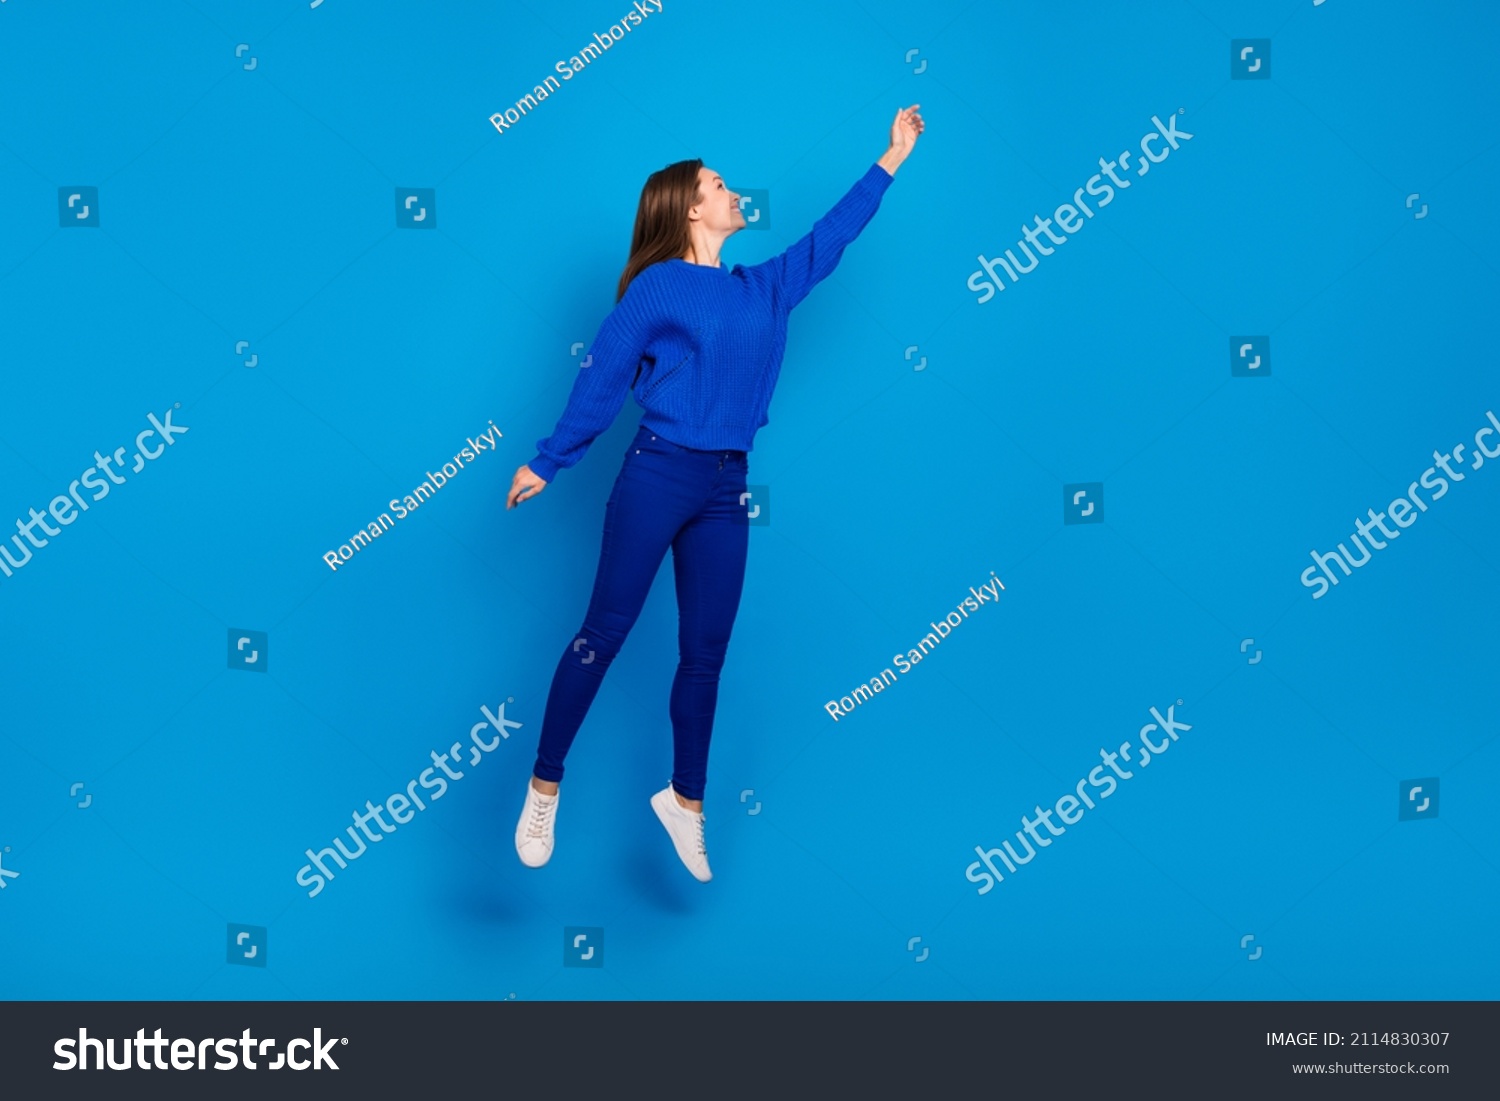 Full length body size view of attractive cheerful girl jumping holding copy space isolated on bright blue color background #2114830307